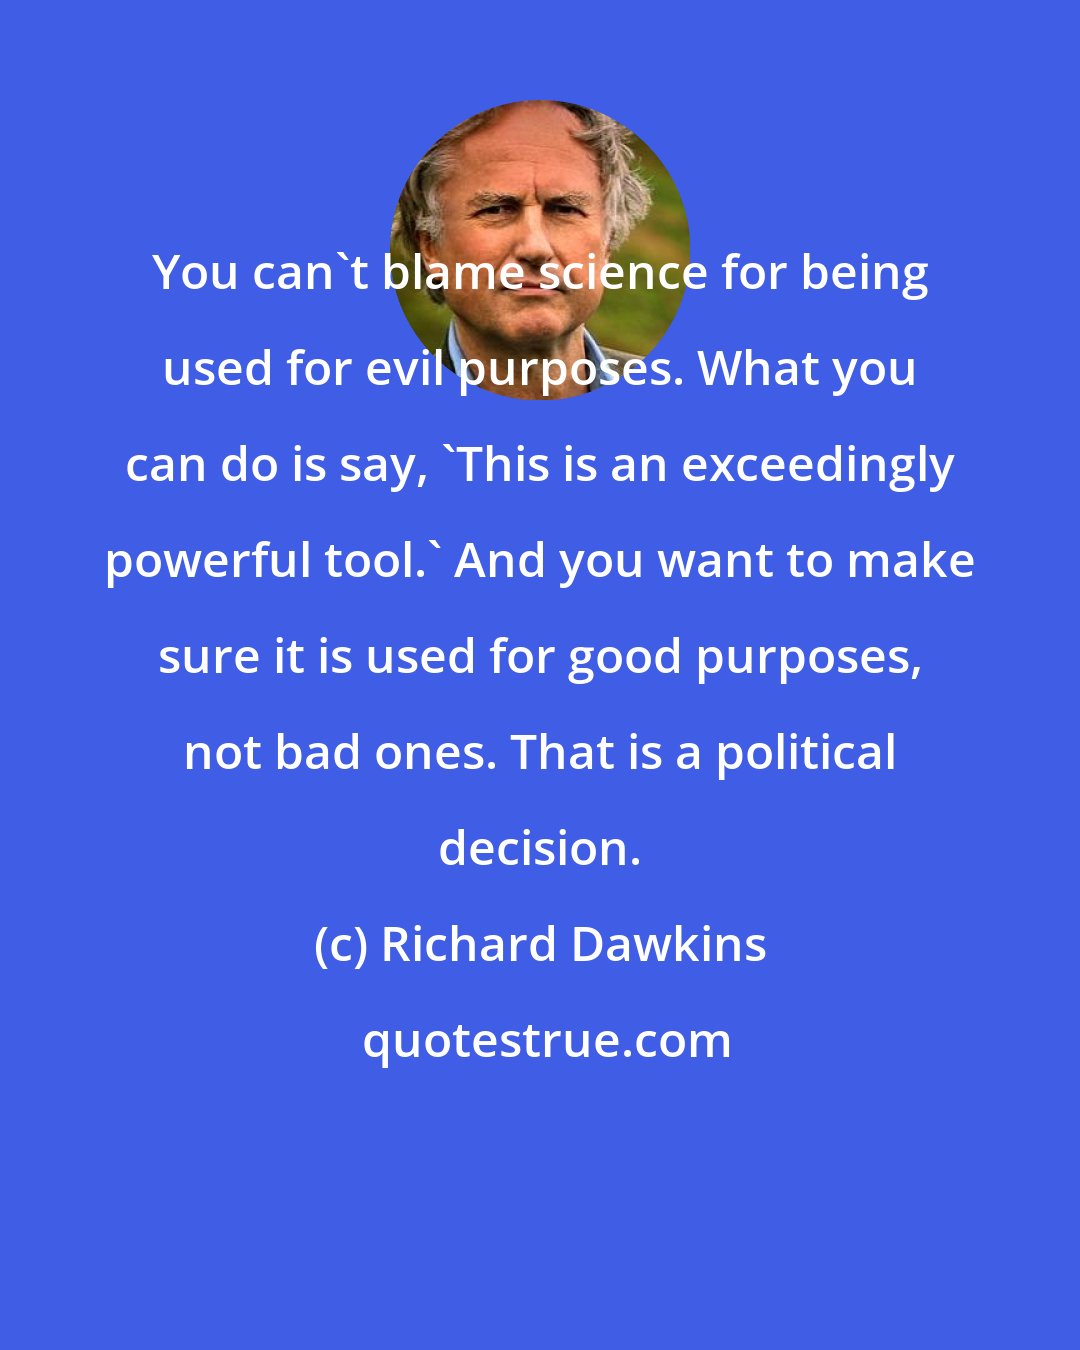 Richard Dawkins: You can't blame science for being used for evil purposes. What you can do is say, 'This is an exceedingly powerful tool.' And you want to make sure it is used for good purposes, not bad ones. That is a political decision.